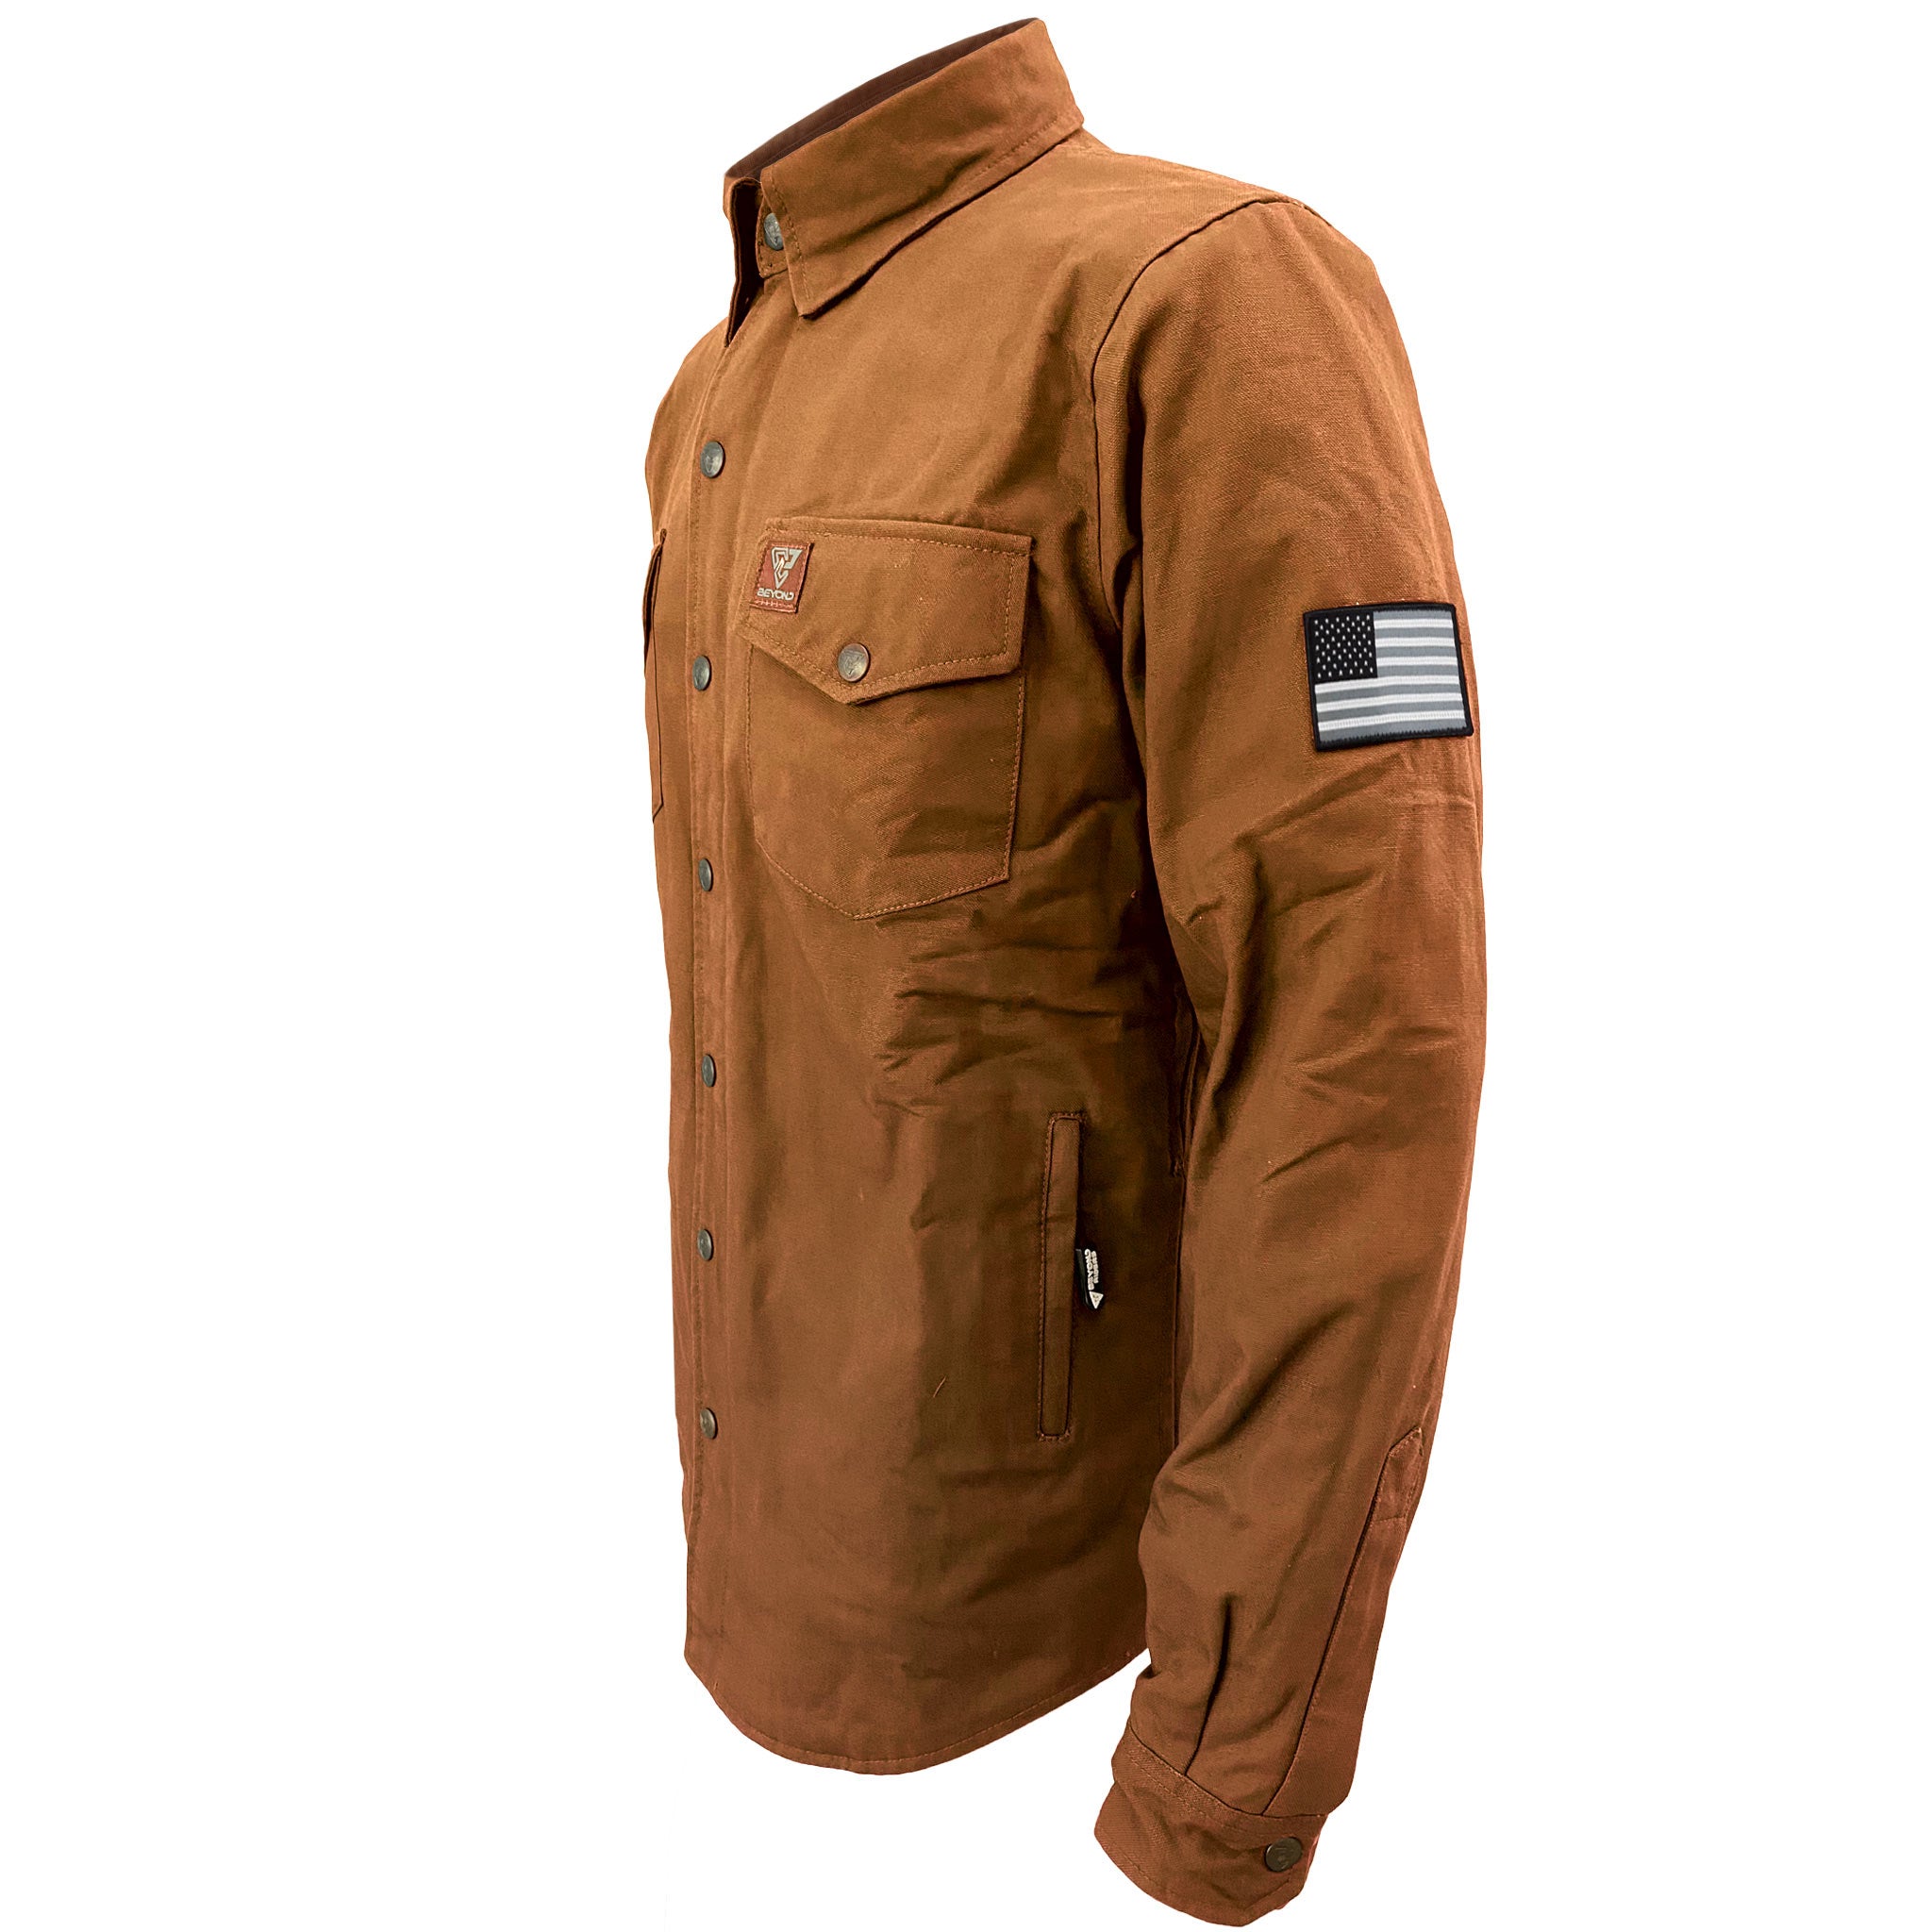 AquaGuard Men's Auxiliary Canvas Work Jacket, Duck Brown, X-Small